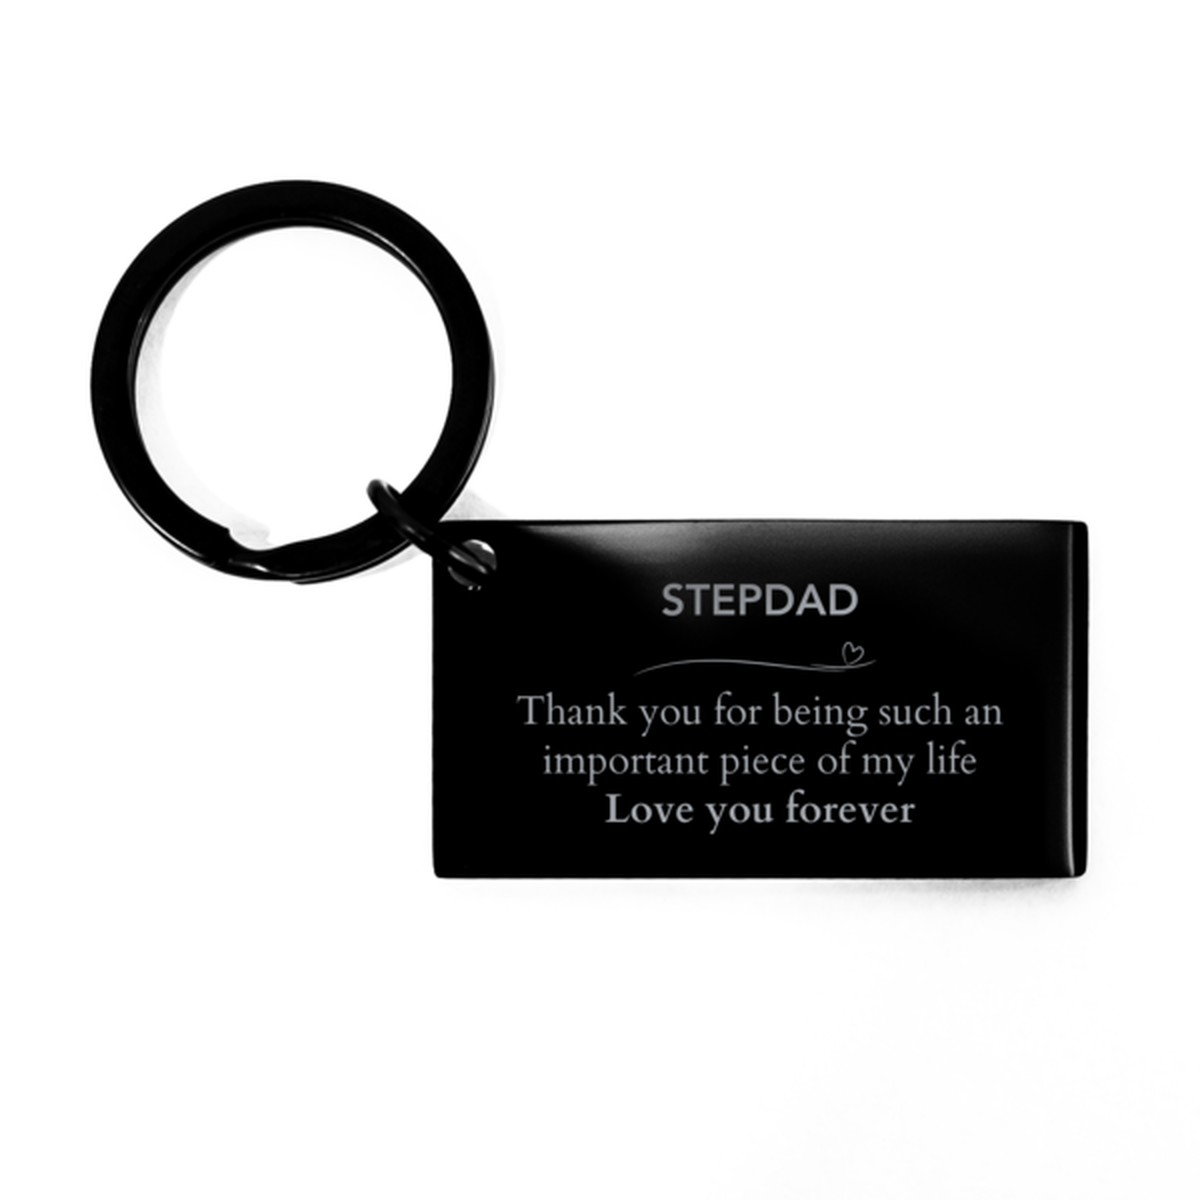 Appropriate Stepdad Keychain Epic Birthday Gifts for Stepdad Thank you for being such an important piece of my life Stepdad Christmas Mothers Fathers Day